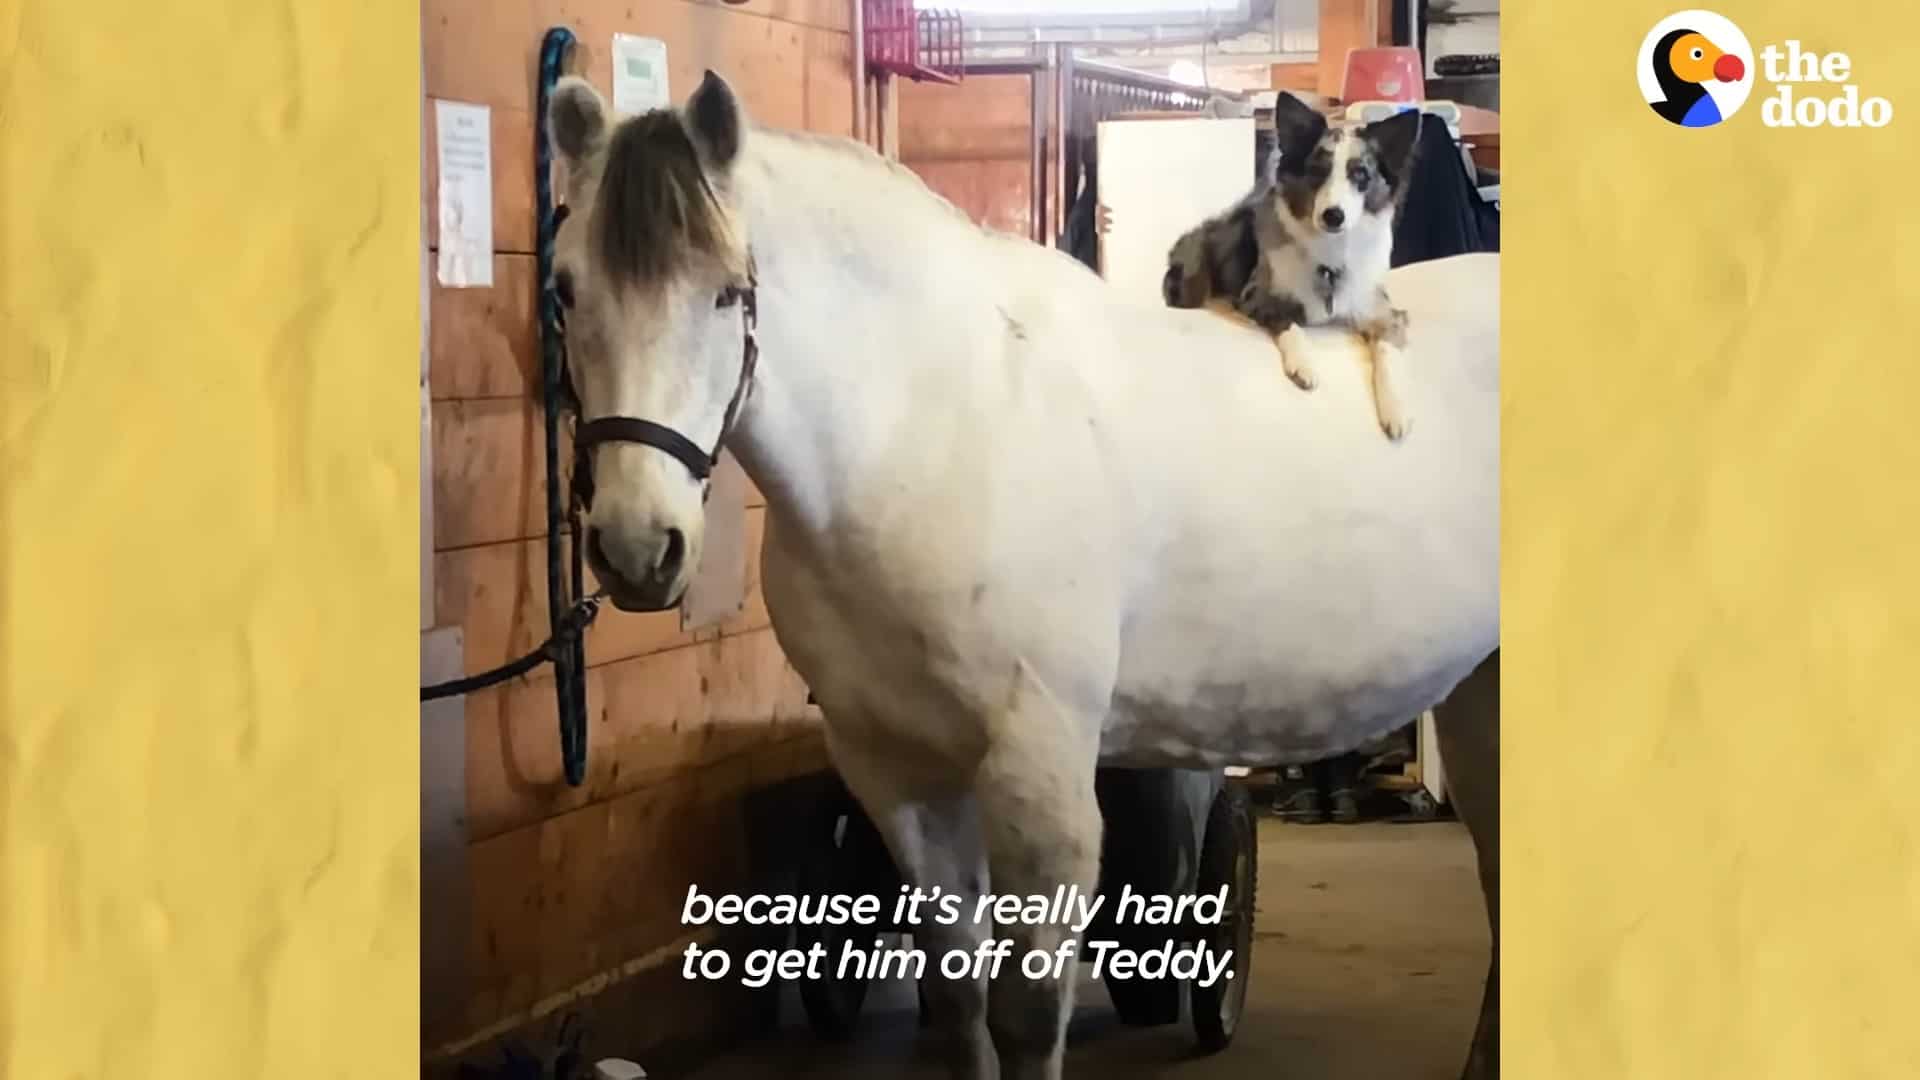 gsd standing on horse's back